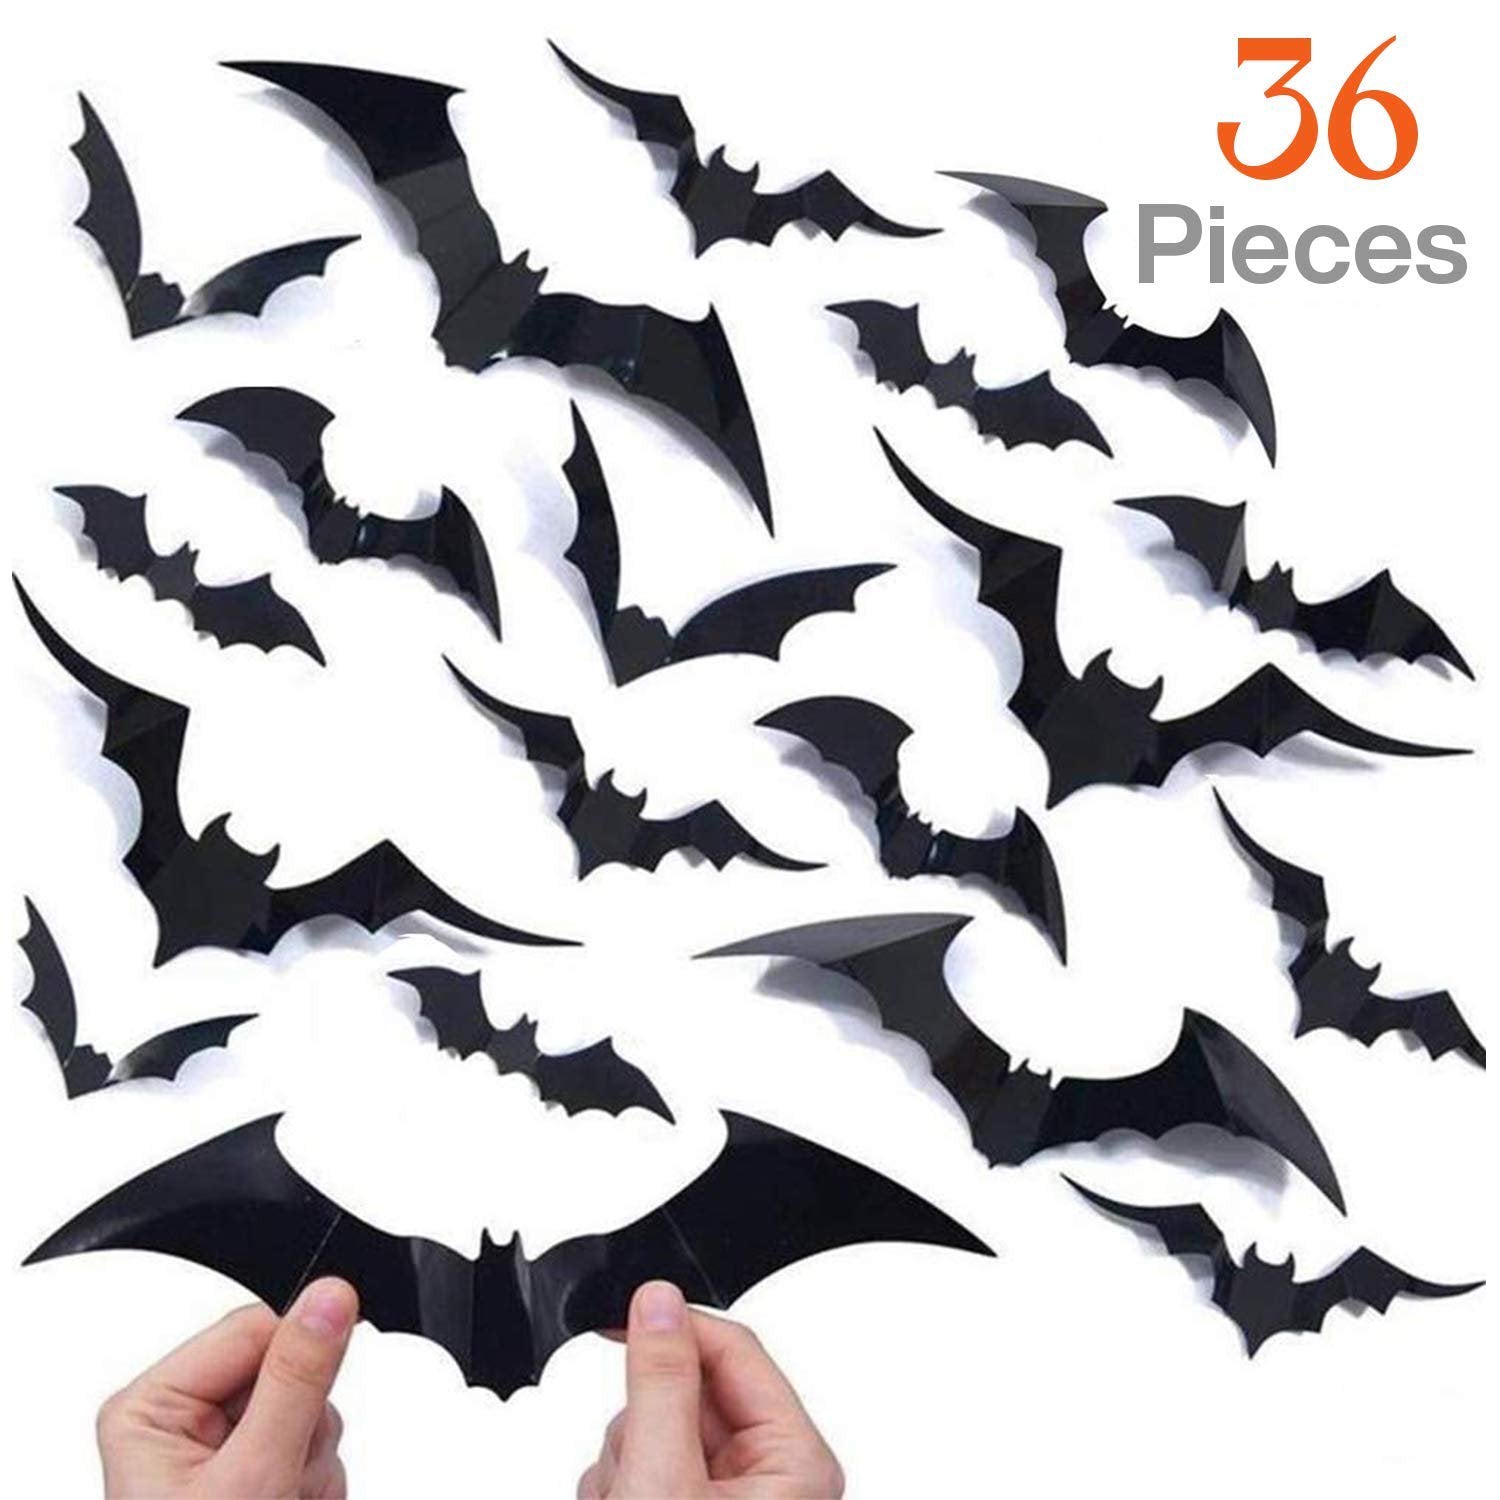 36 PCS Halloween 3D Bats Decoration for Home 4 Different Sizes Realistic PVC Scary Bat Wall Decal Sticker Decor DIY Window Bathroom Indoor Halloween Party Supplies Decorations